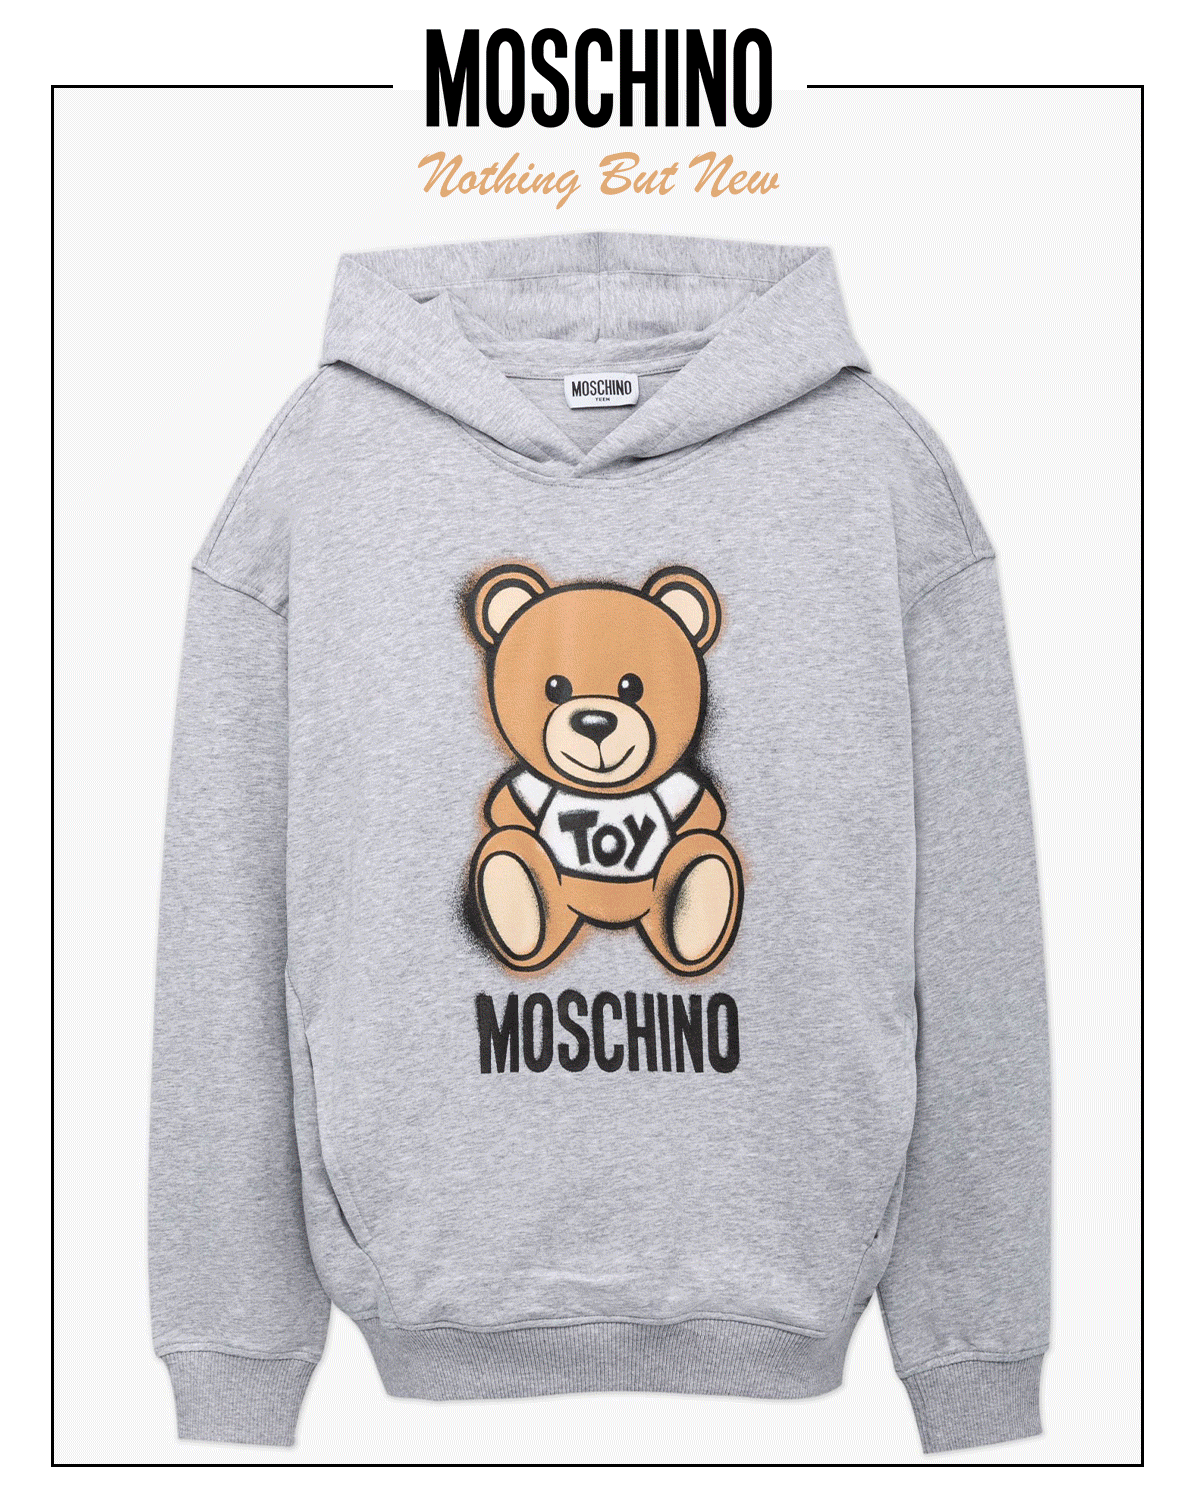 Base: Freshen Up Their Wardrobe With New Moschino | Milled